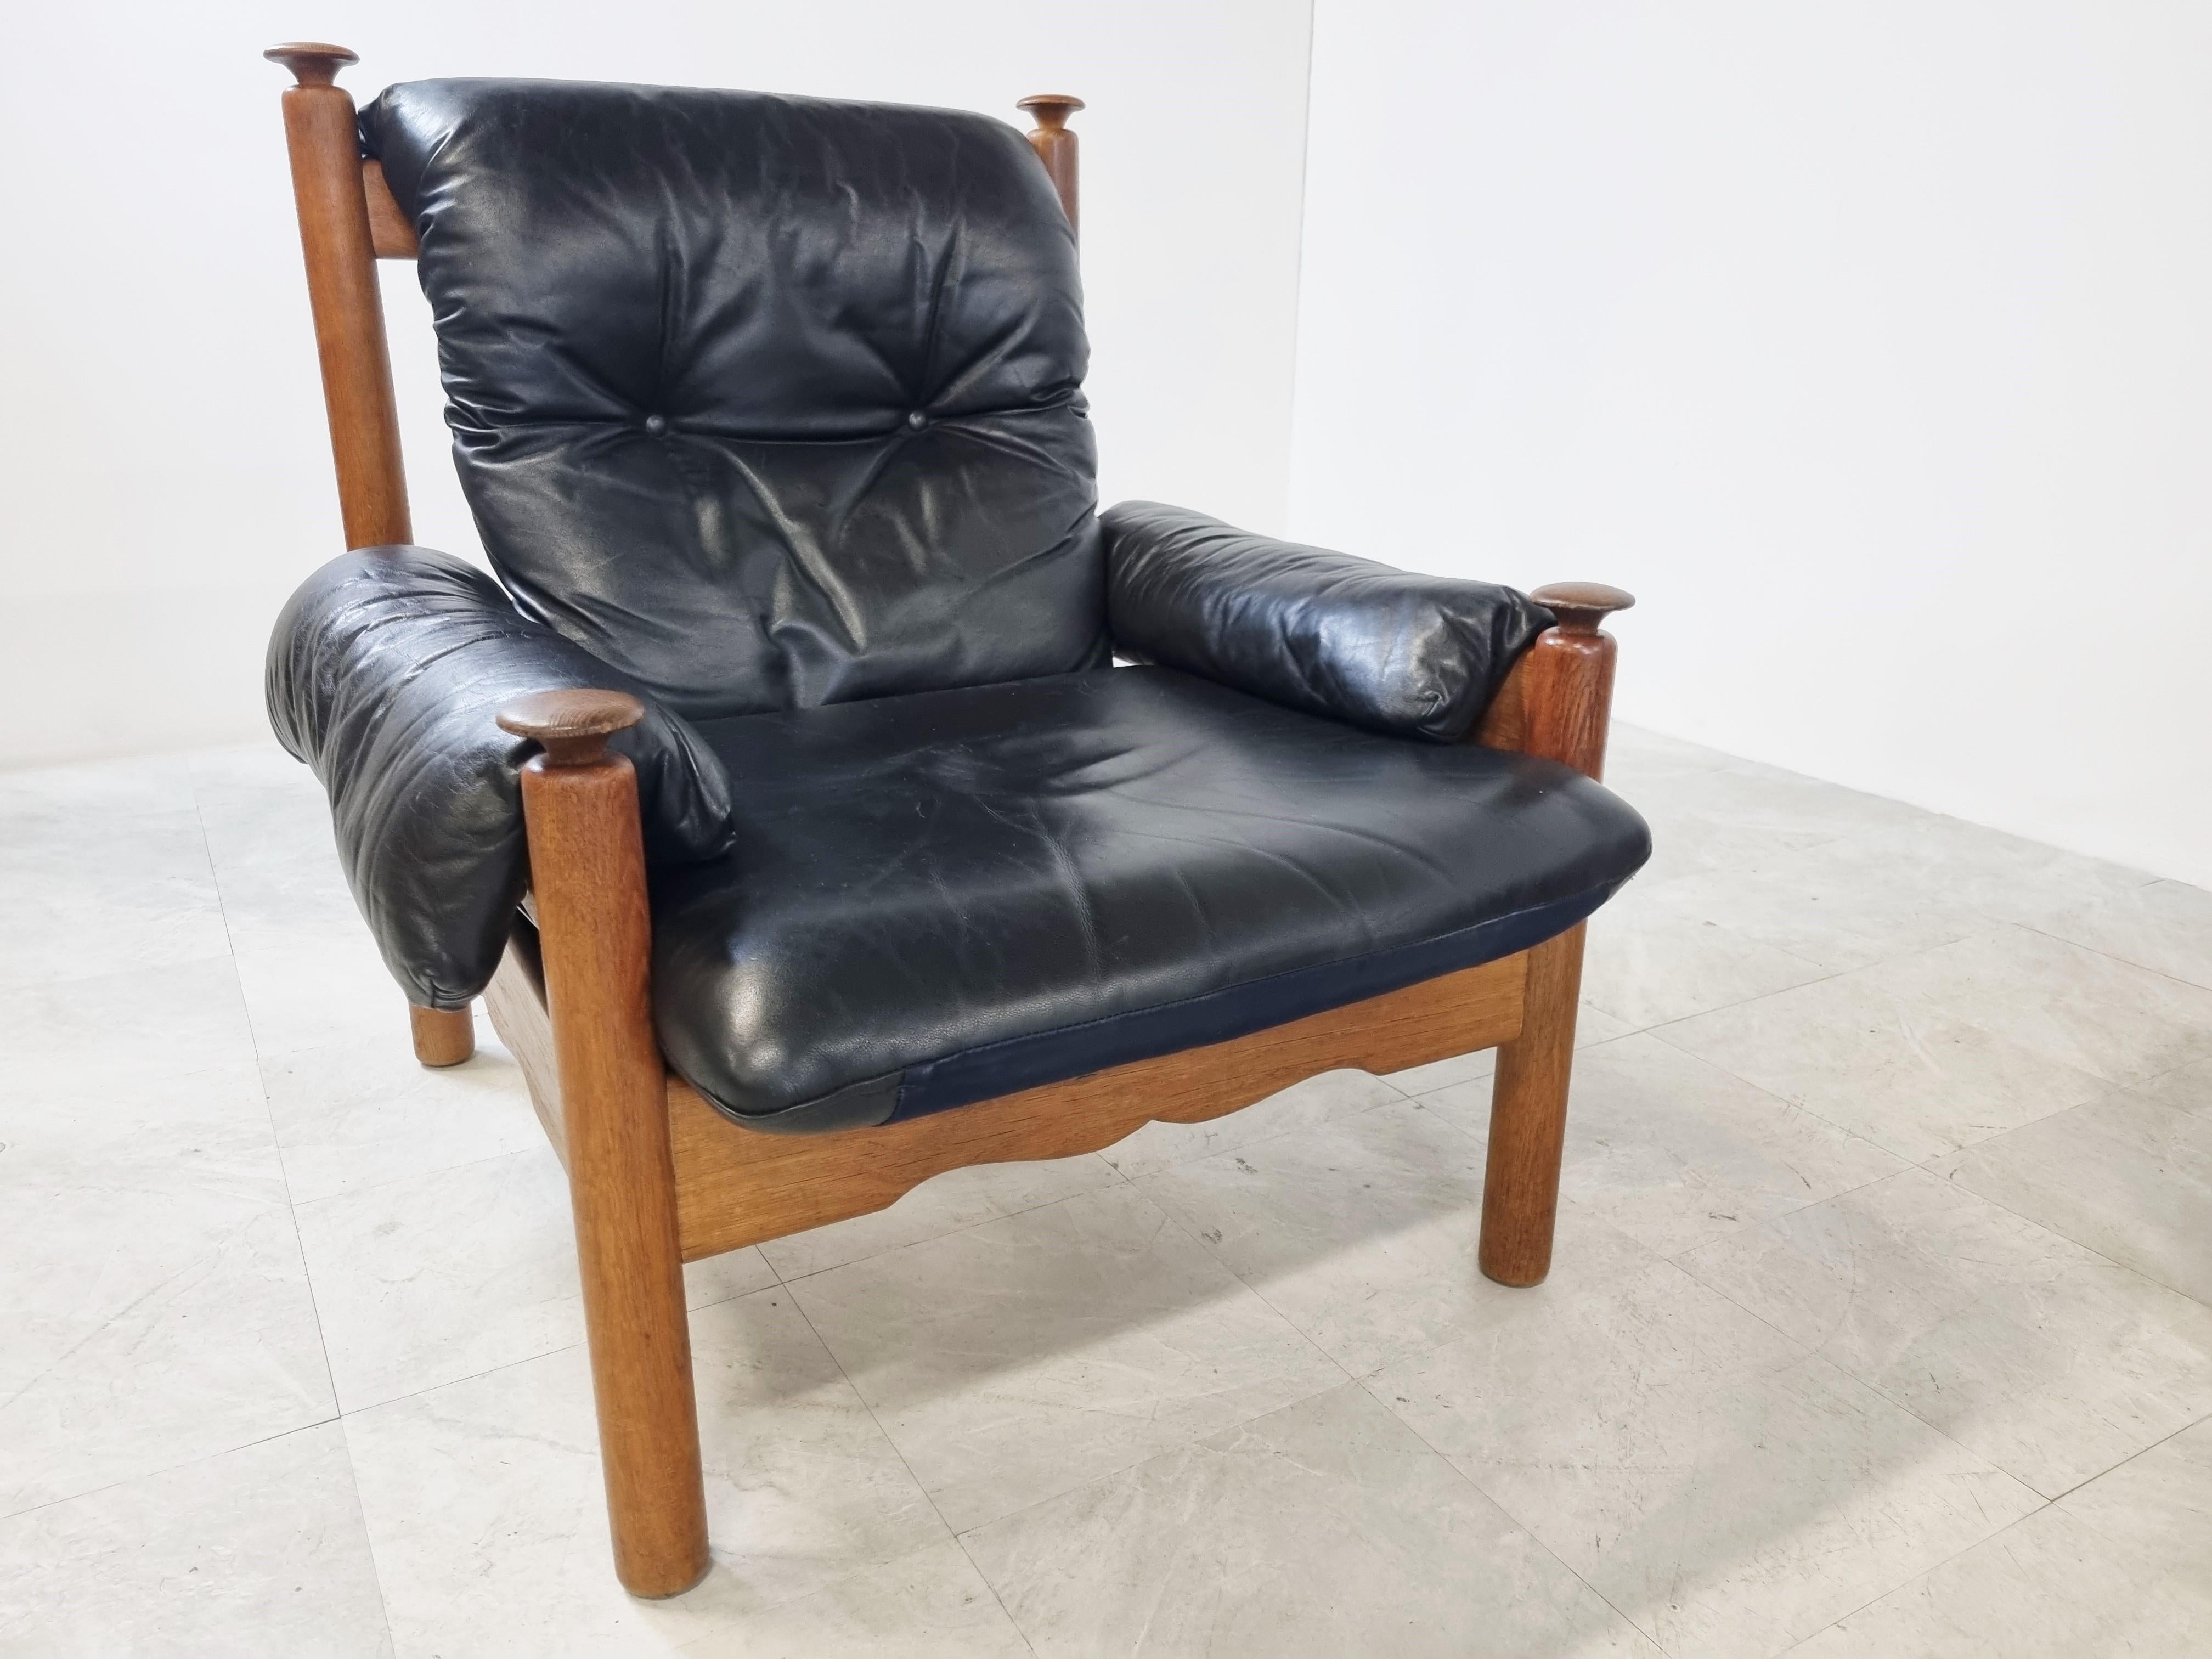 Vintage Brutalist three seater sofa with matching armchair in oak and black leather.

The sofa's are very comfortable and have a nice brutalist design.

Good condition.

1970s - Germany

Dimensions:
3 Seater:
Height: 83cm/32.67